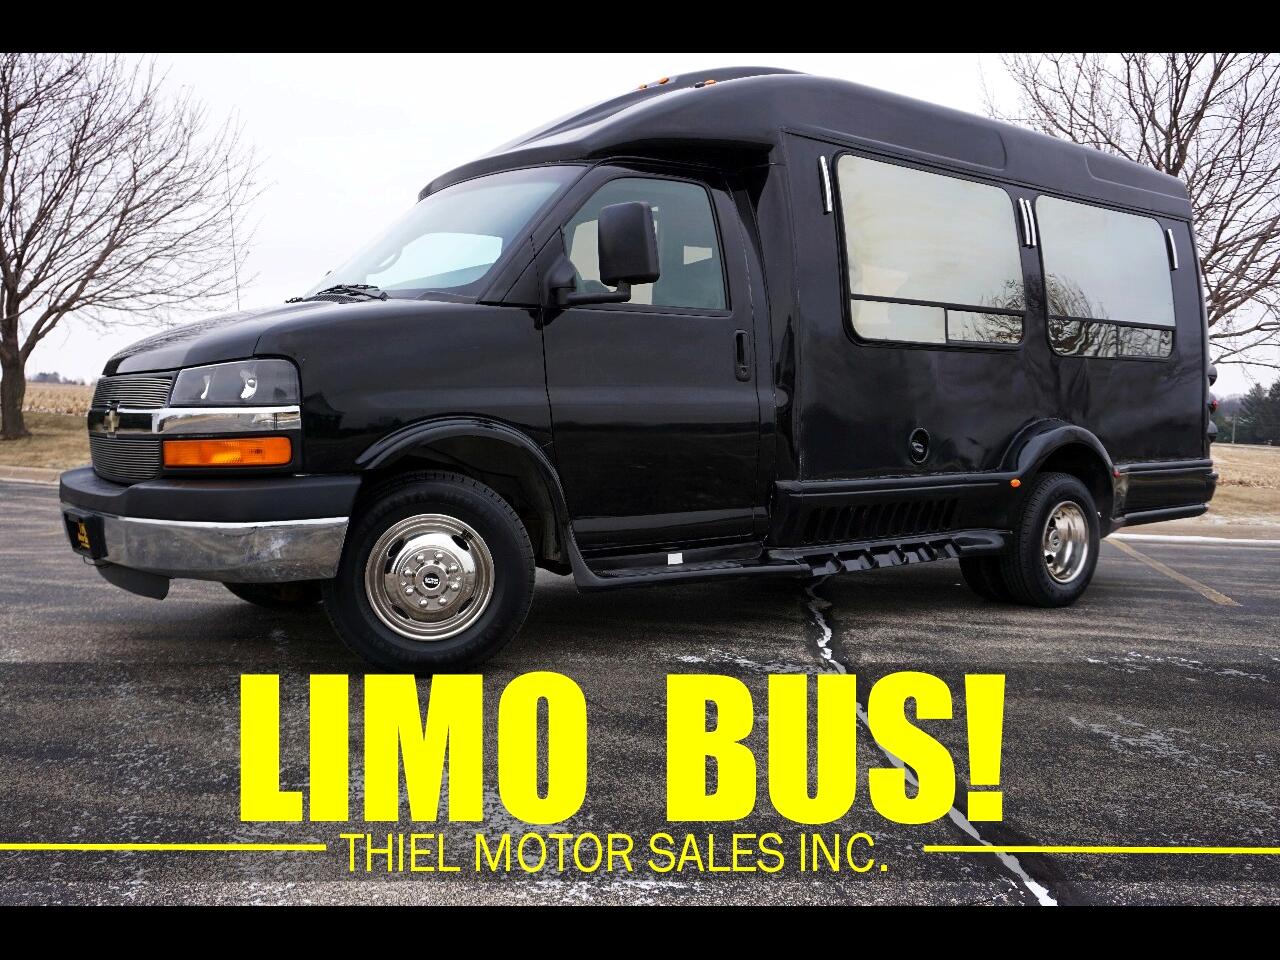 Used 2008 Chevrolet Express 3500 PRIVATE LIMO BUS for Sale in De Witt IA  52742 Thiel Motor Sales